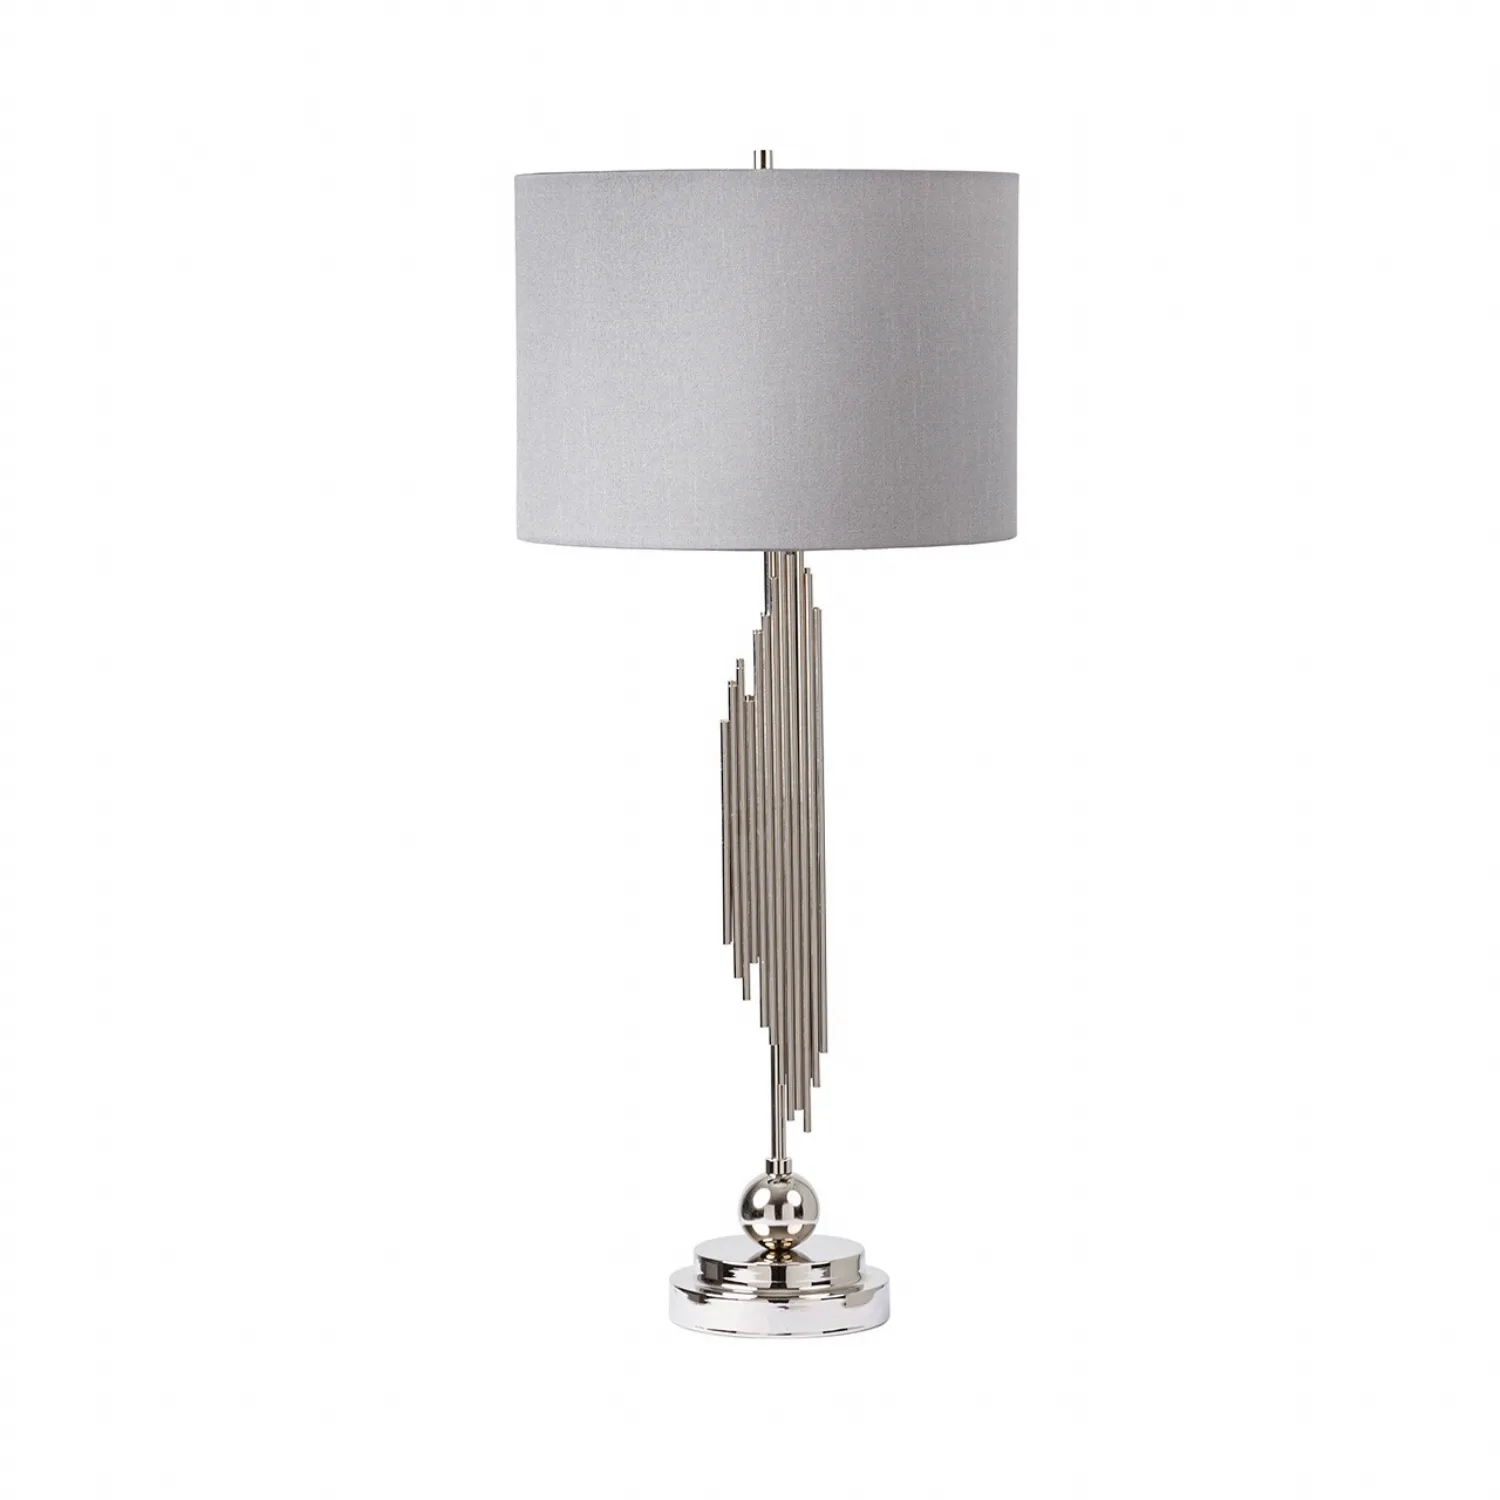 83cm Cohen Chrome Table Lamp With Grey Shade